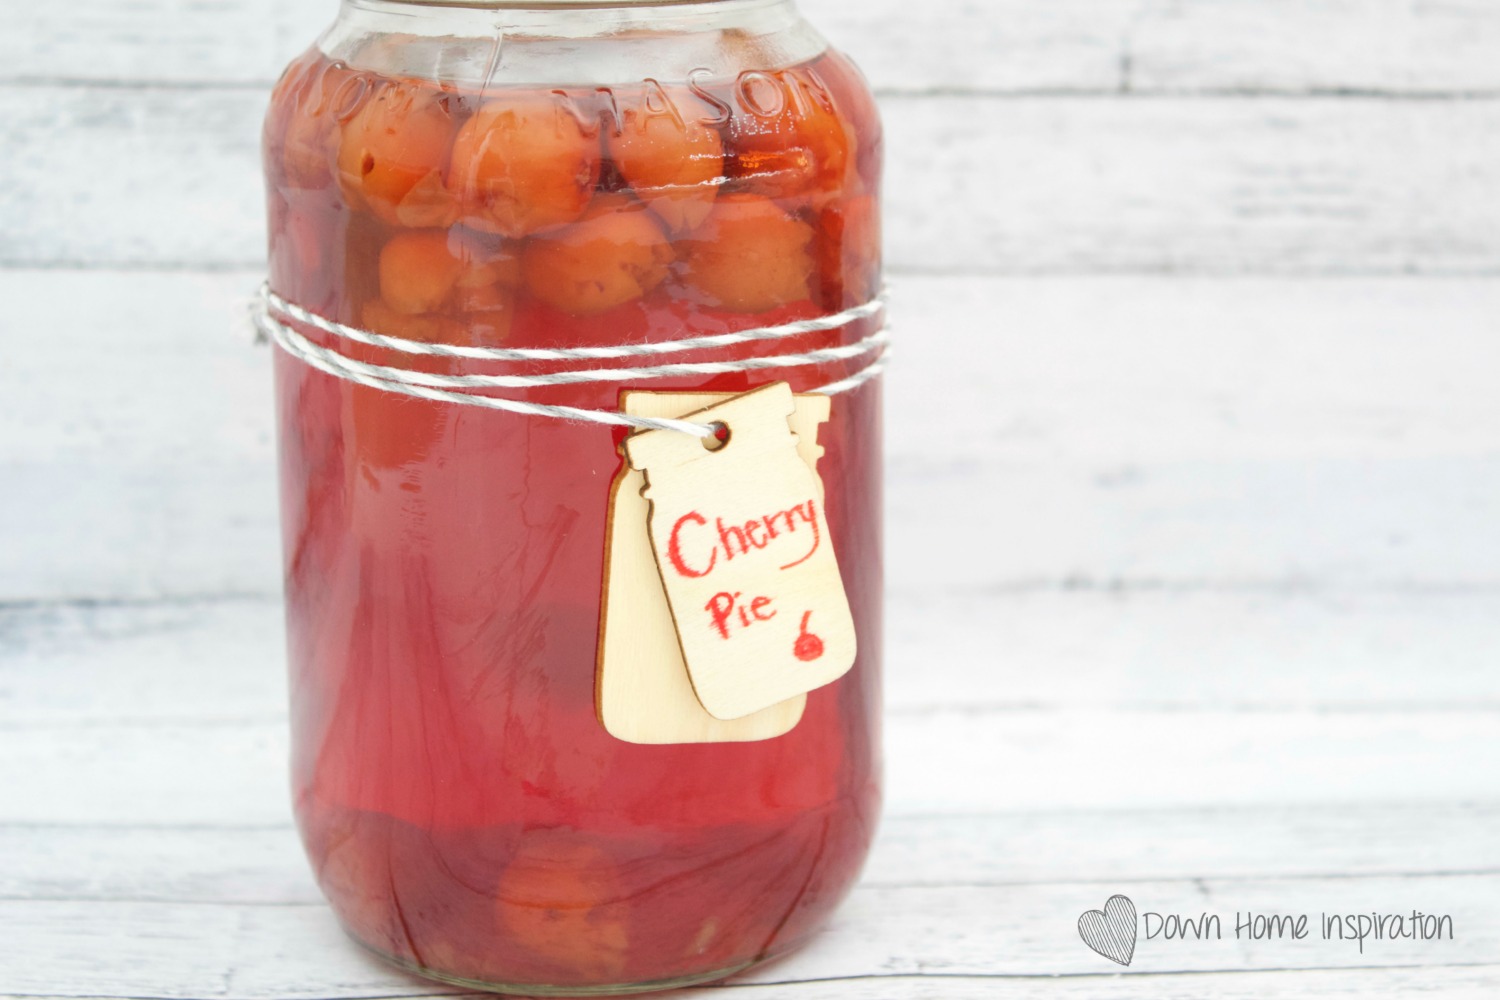 Cherry Pie Moonshine! This would be great for a Father's Day gift or a